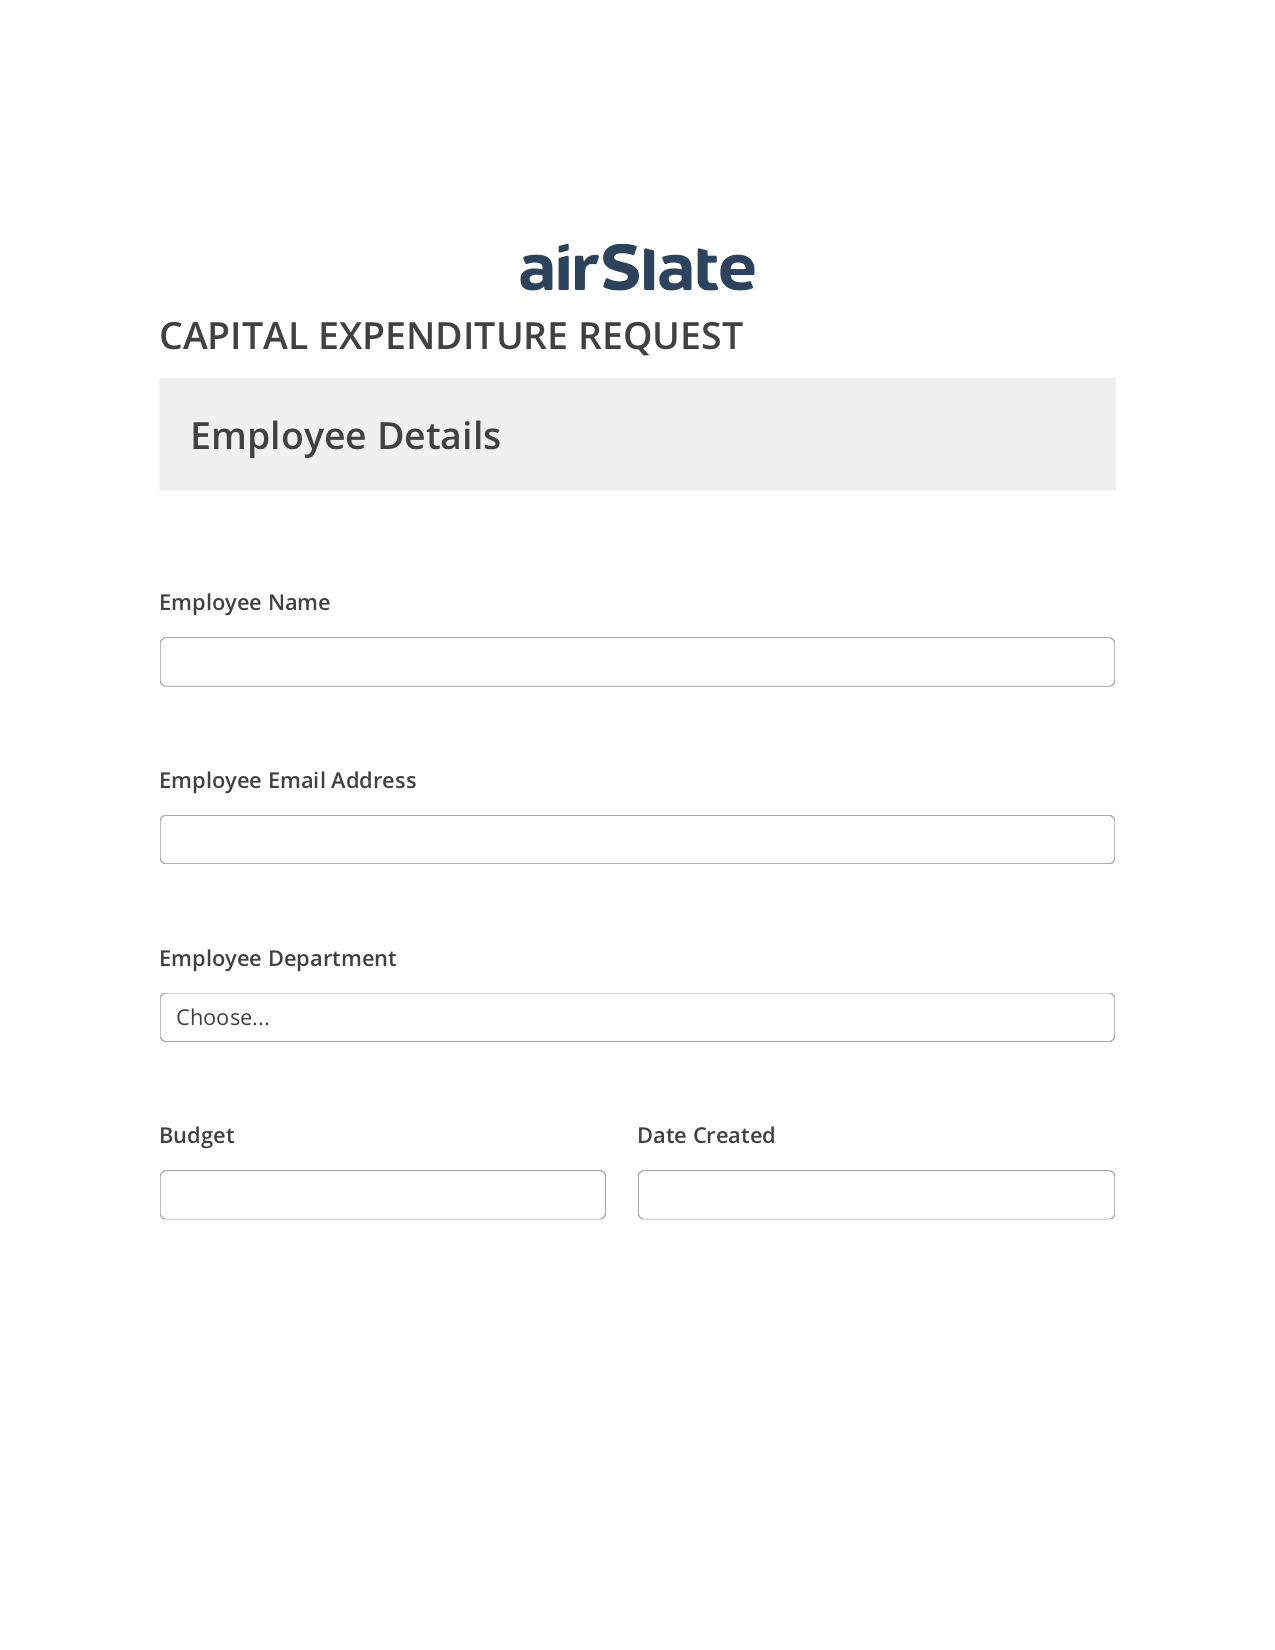 Multirole Capital Expenditure Request Approval Workflow Pre-fill Slate from MS Dynamics 365 record, Create Slate Reminder Bot, Export to NetSuite Bot